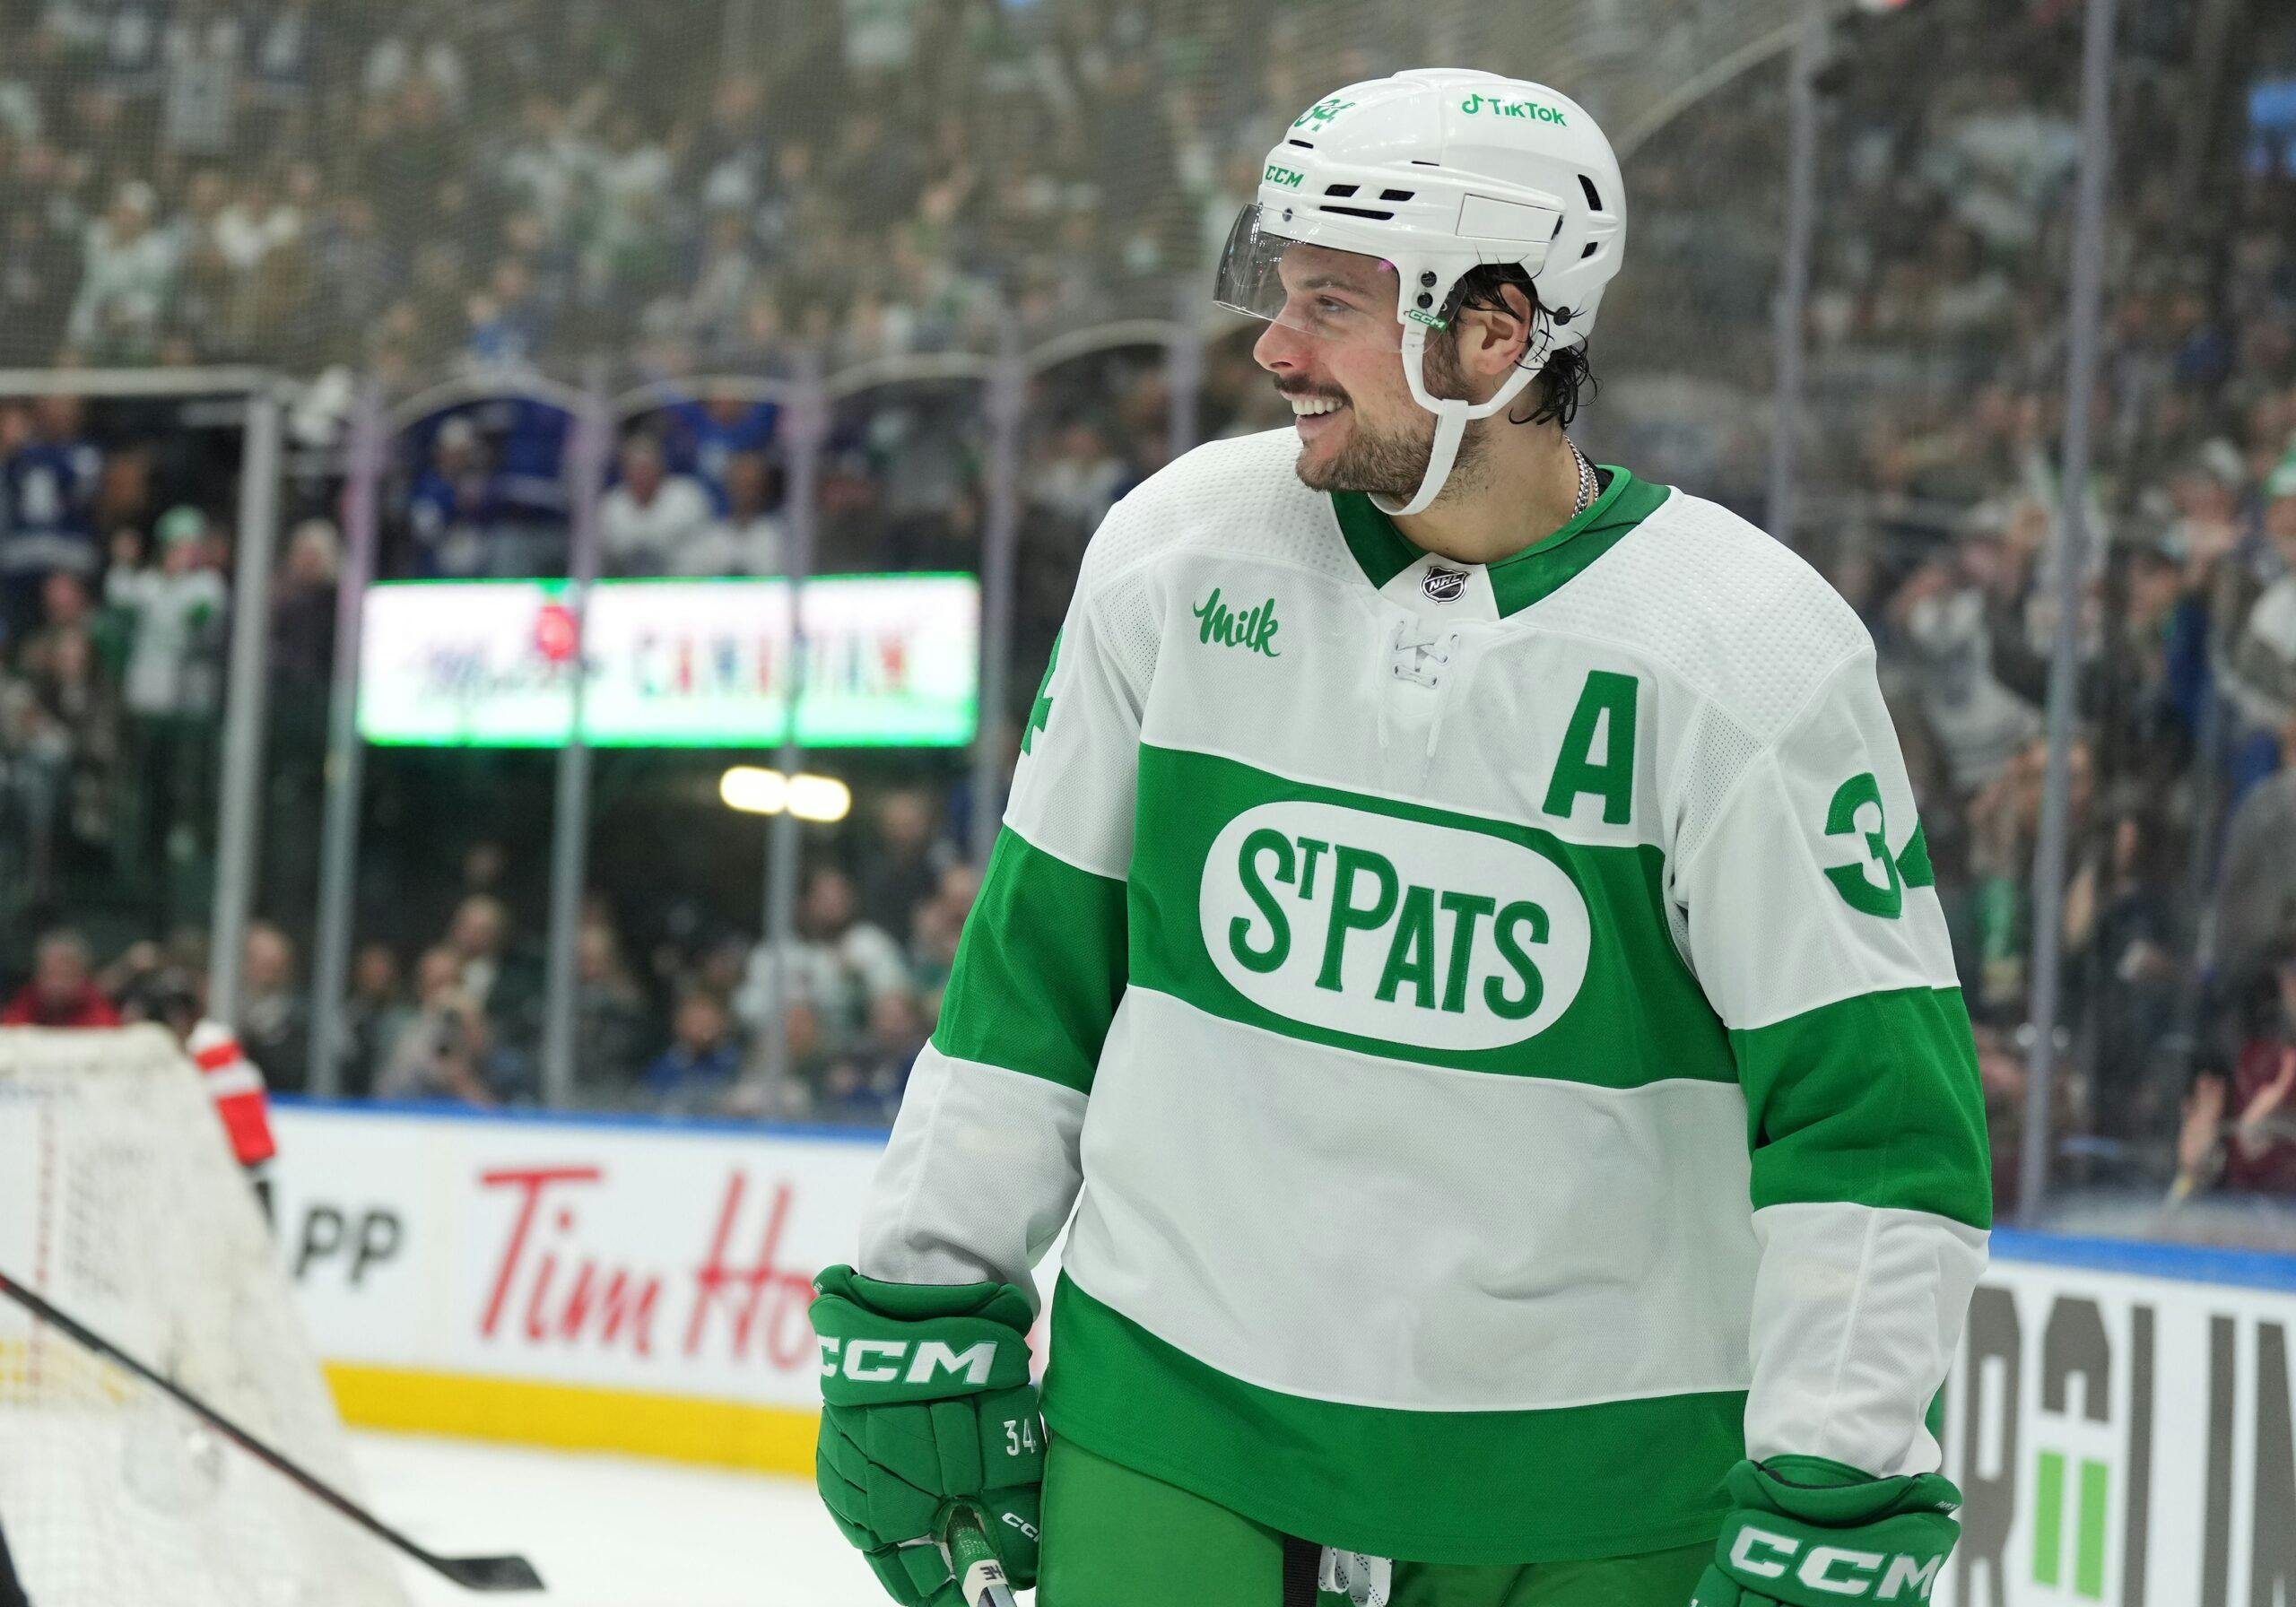 The St. Pats uniforms are back and better than ever - TheLeafsNation